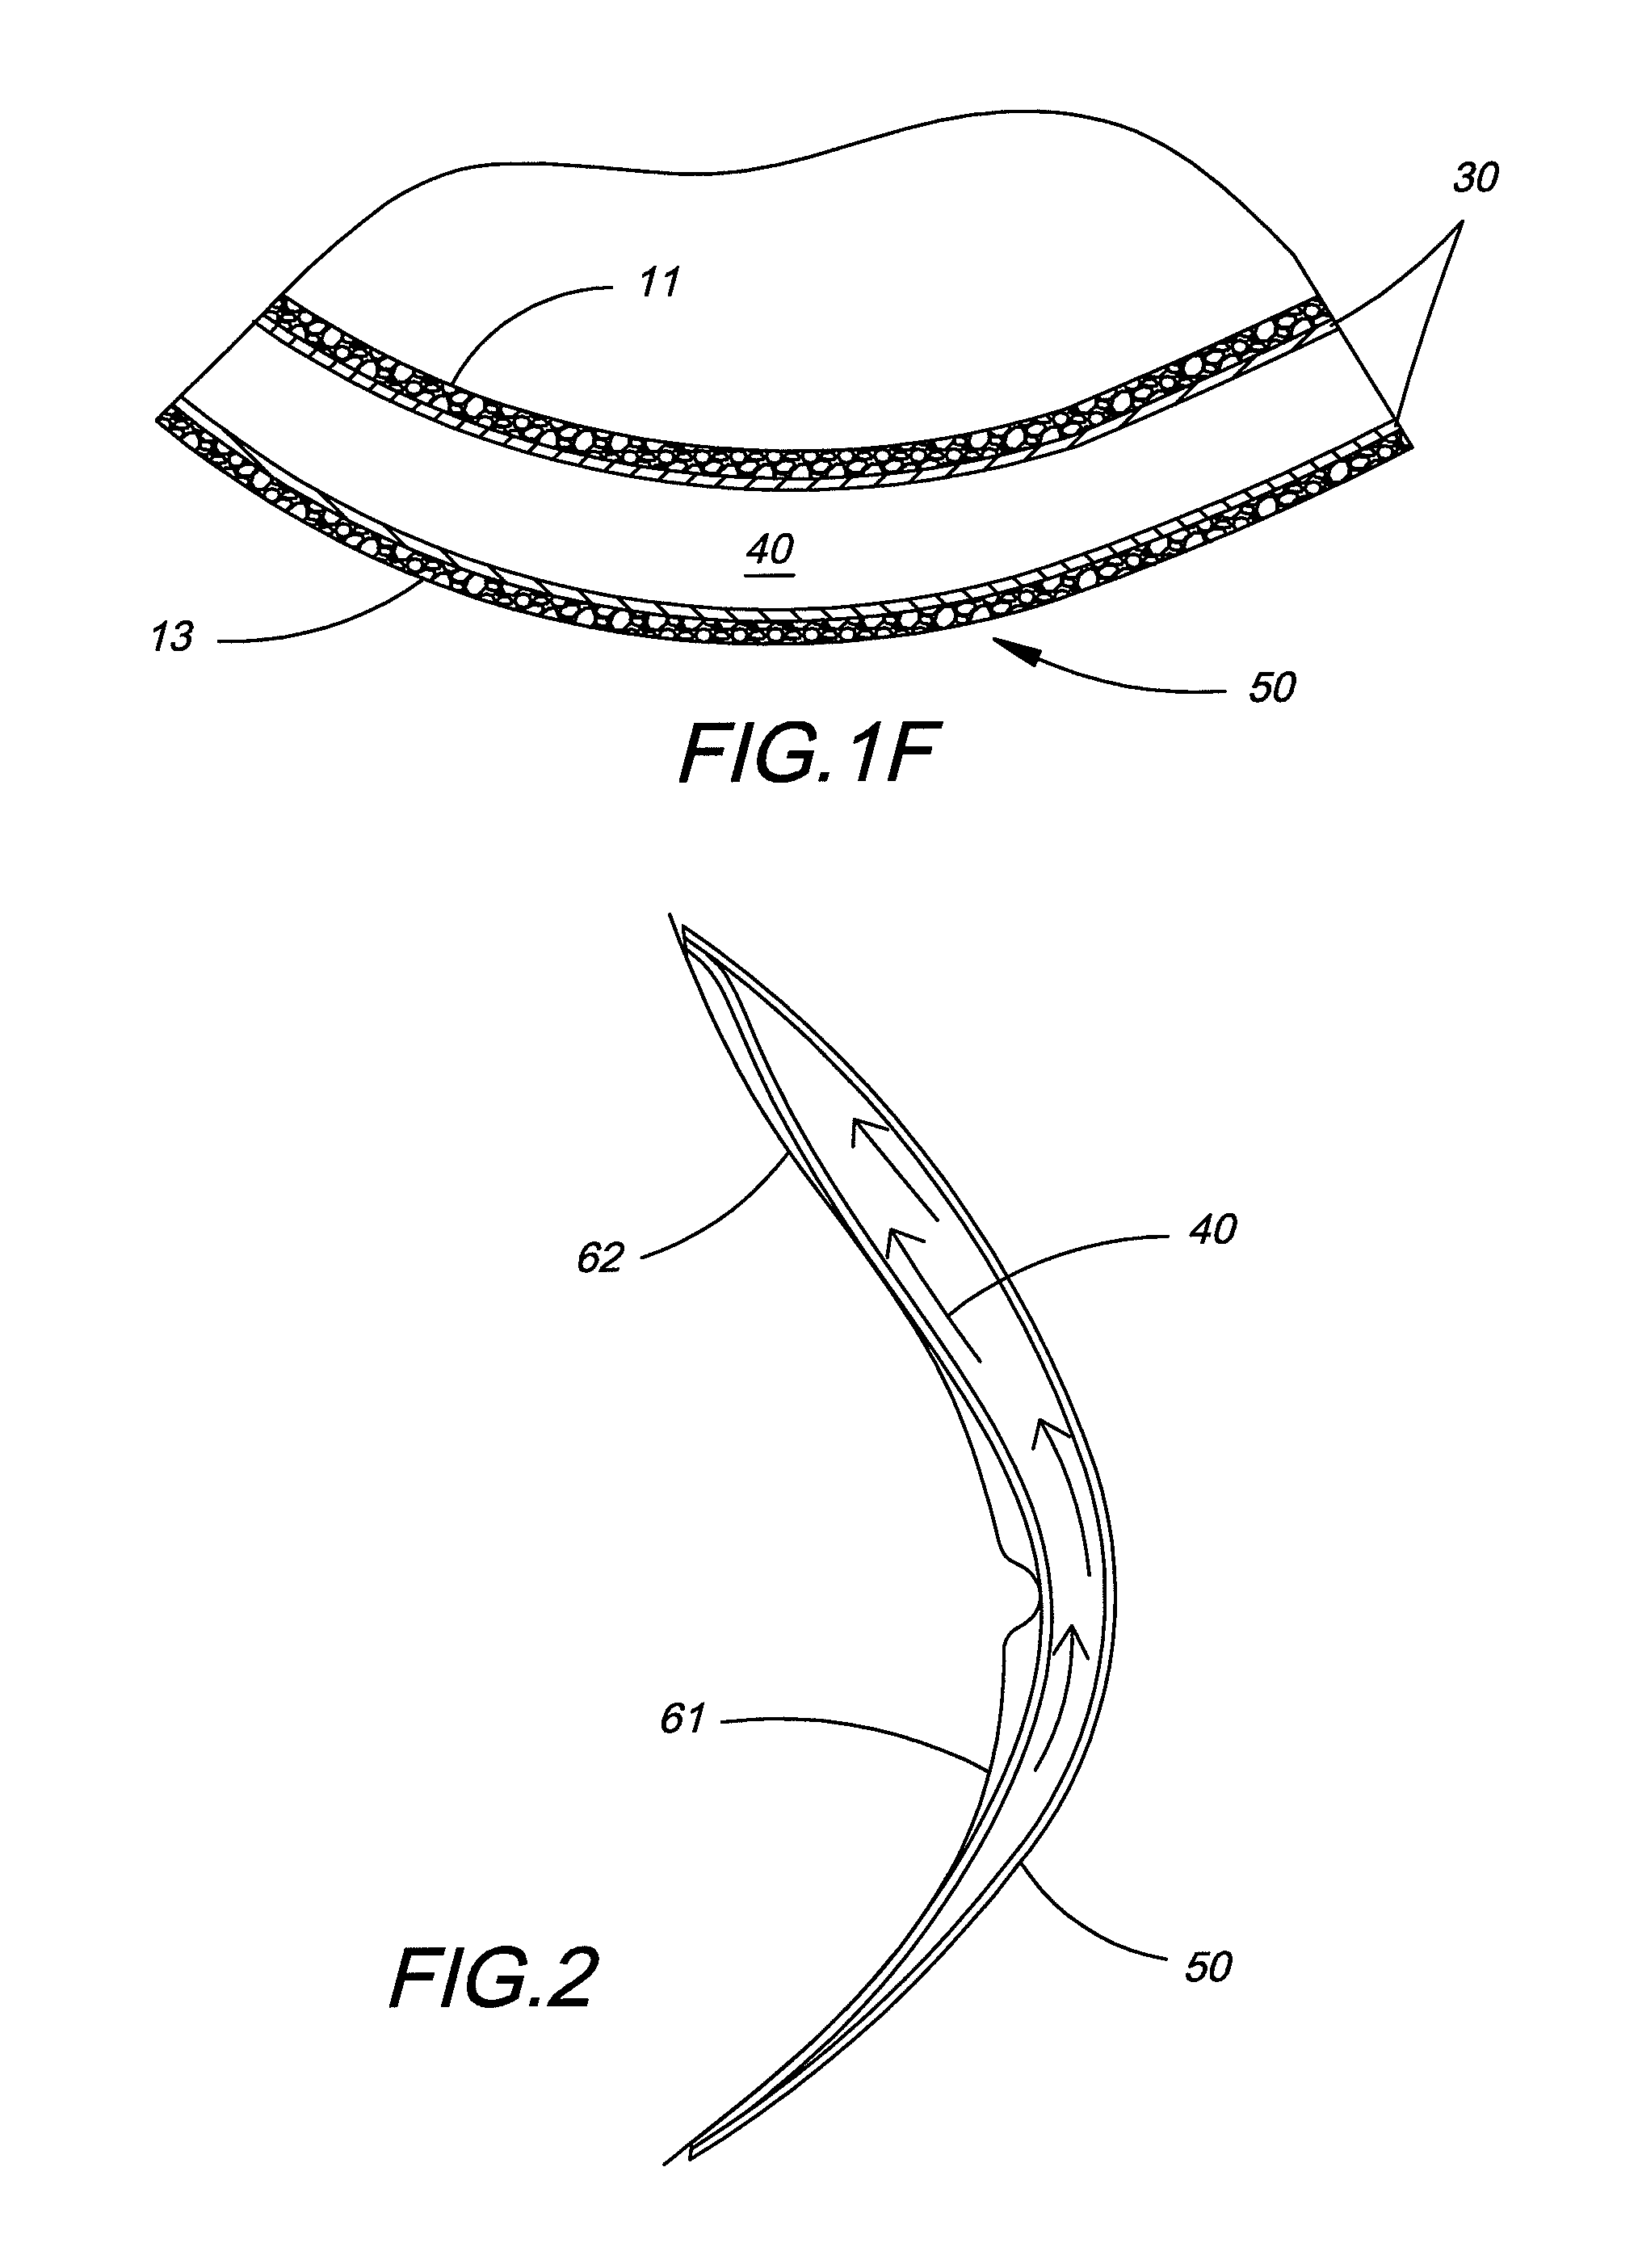 Method for forming a brassiere cup